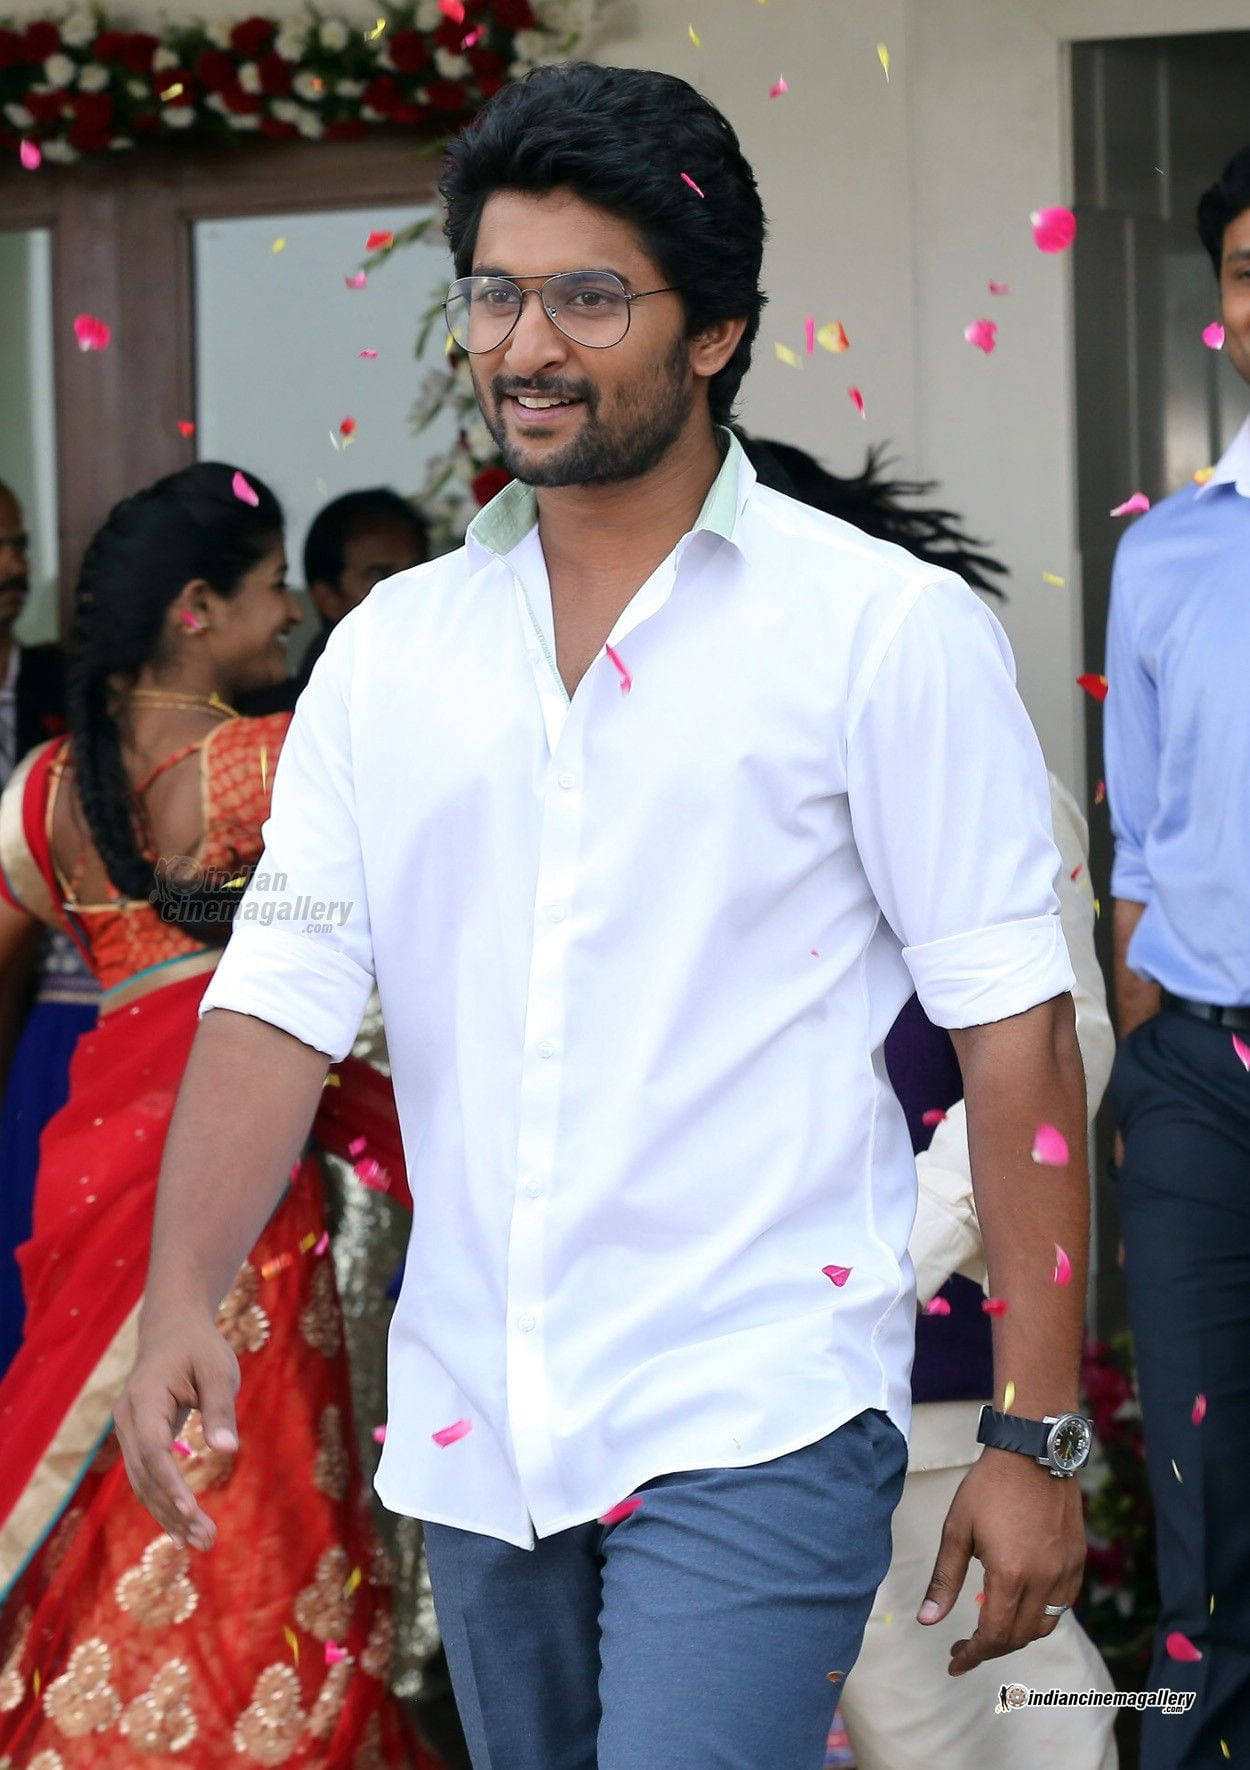 Dashing Look of Actor Nani in Casual White Outfit Wallpaper